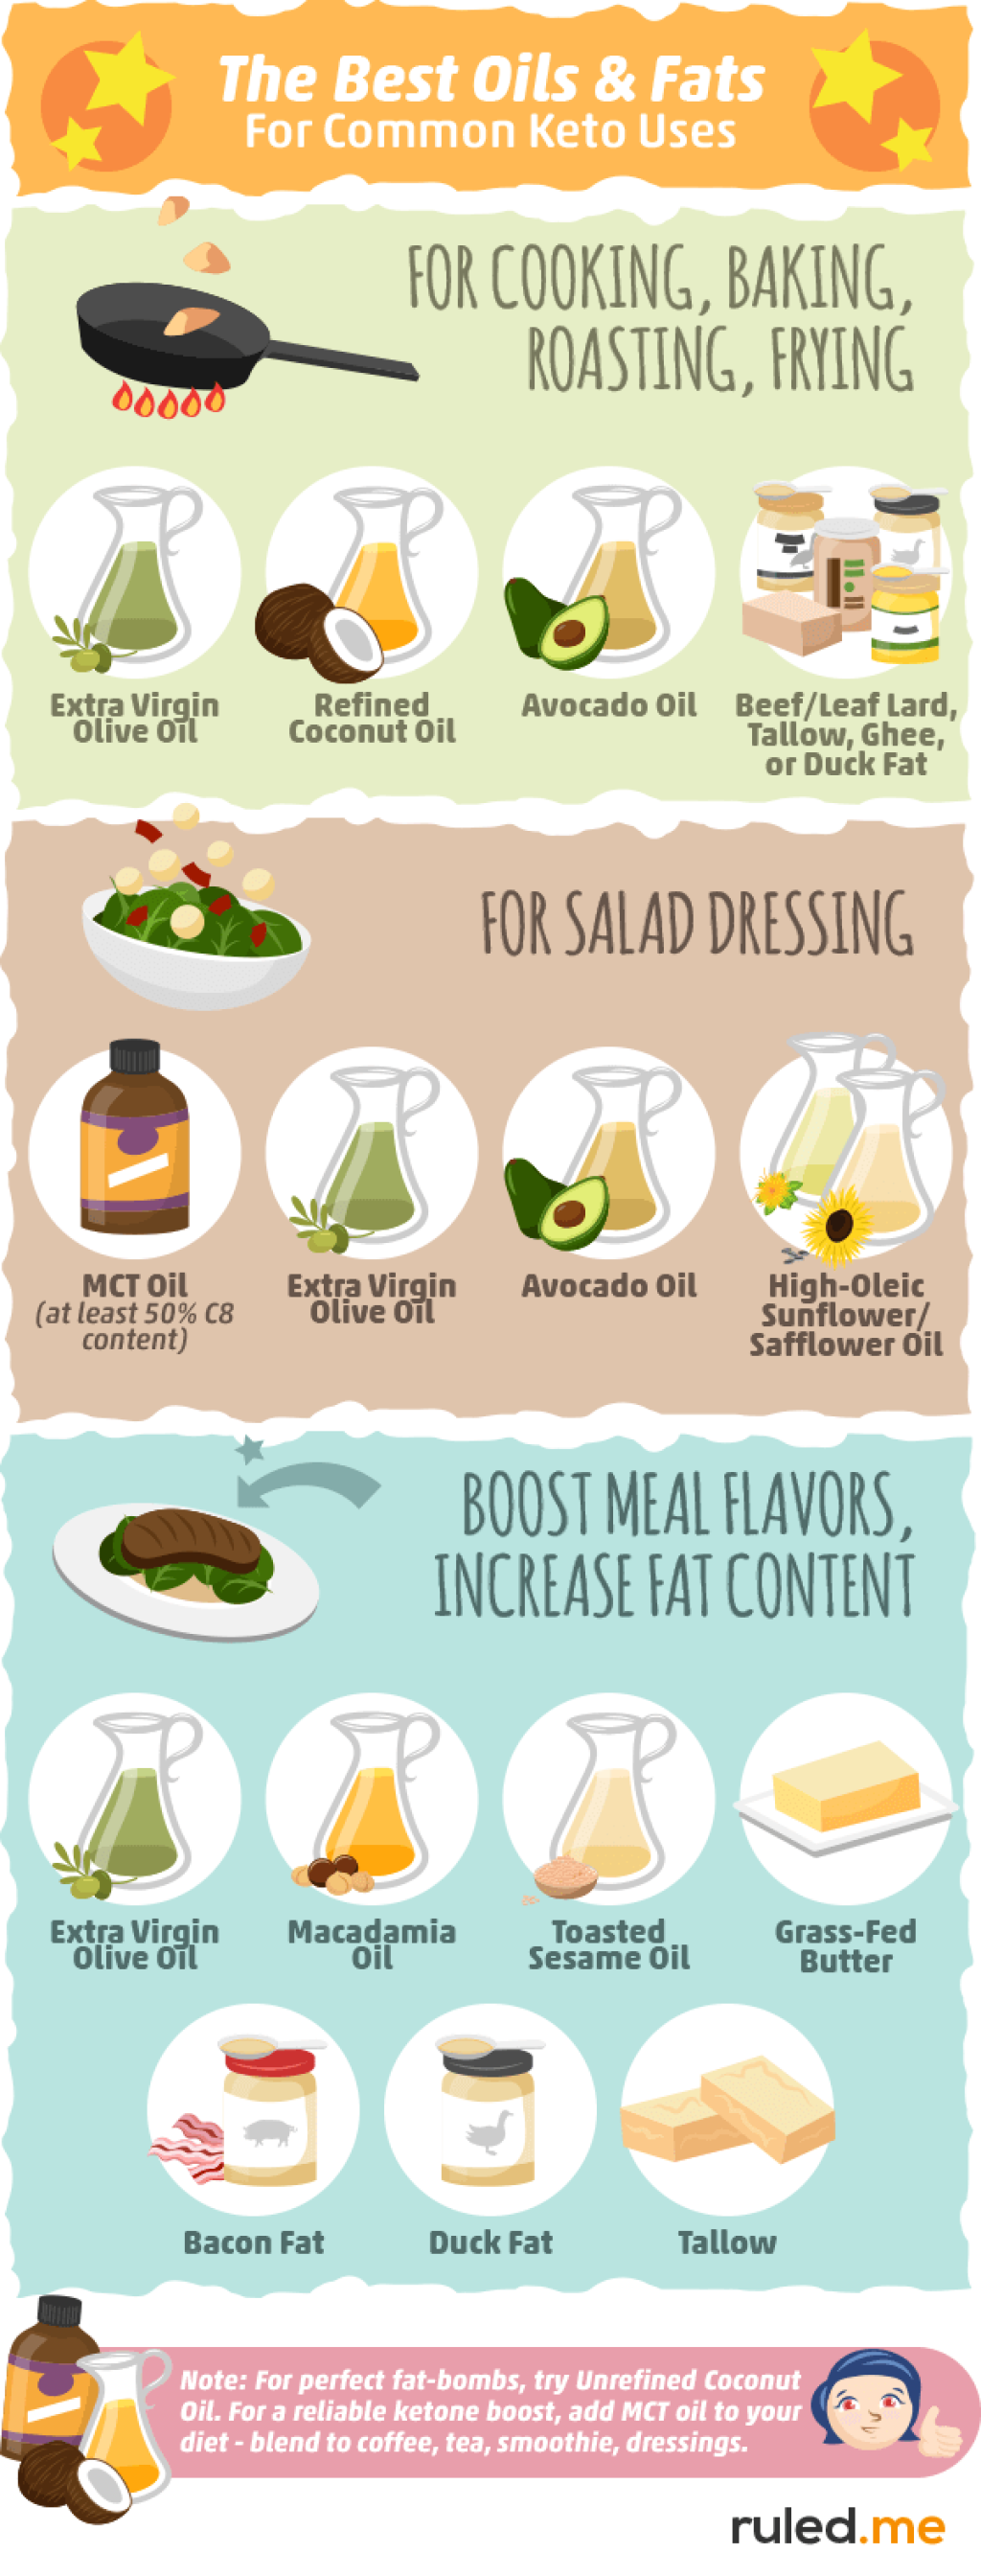 Picture of: The Keto Oil Guide: The Best, Worst, and What to Avoid